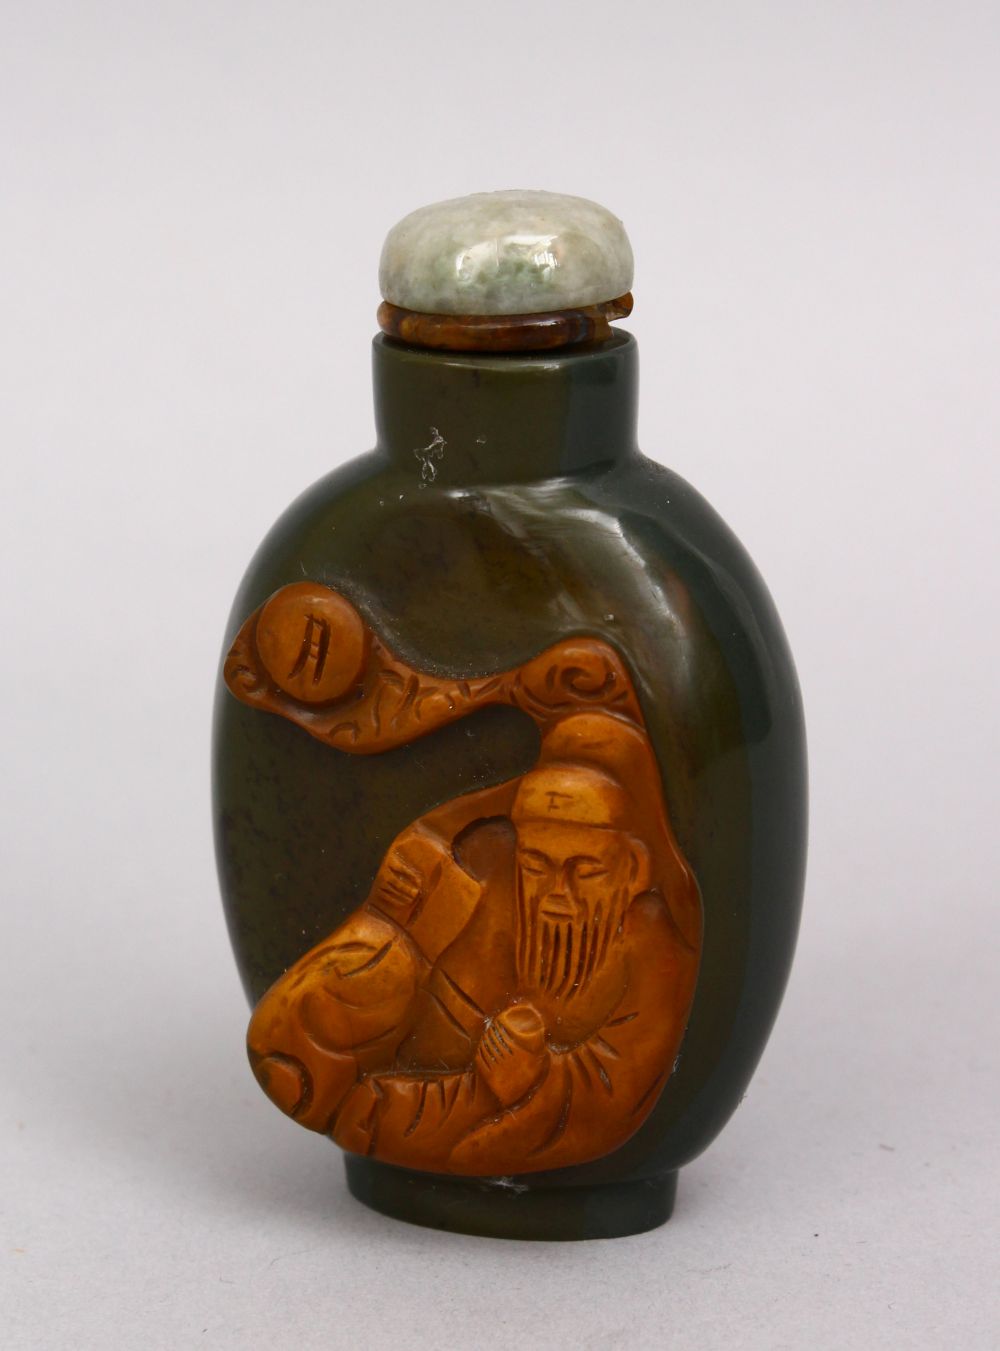 A GOOD 19TH / 20TH CENTURY CHINESE CARVED GLASS OVERLAID SNUFF BOTTLE, with a hardstone stopper